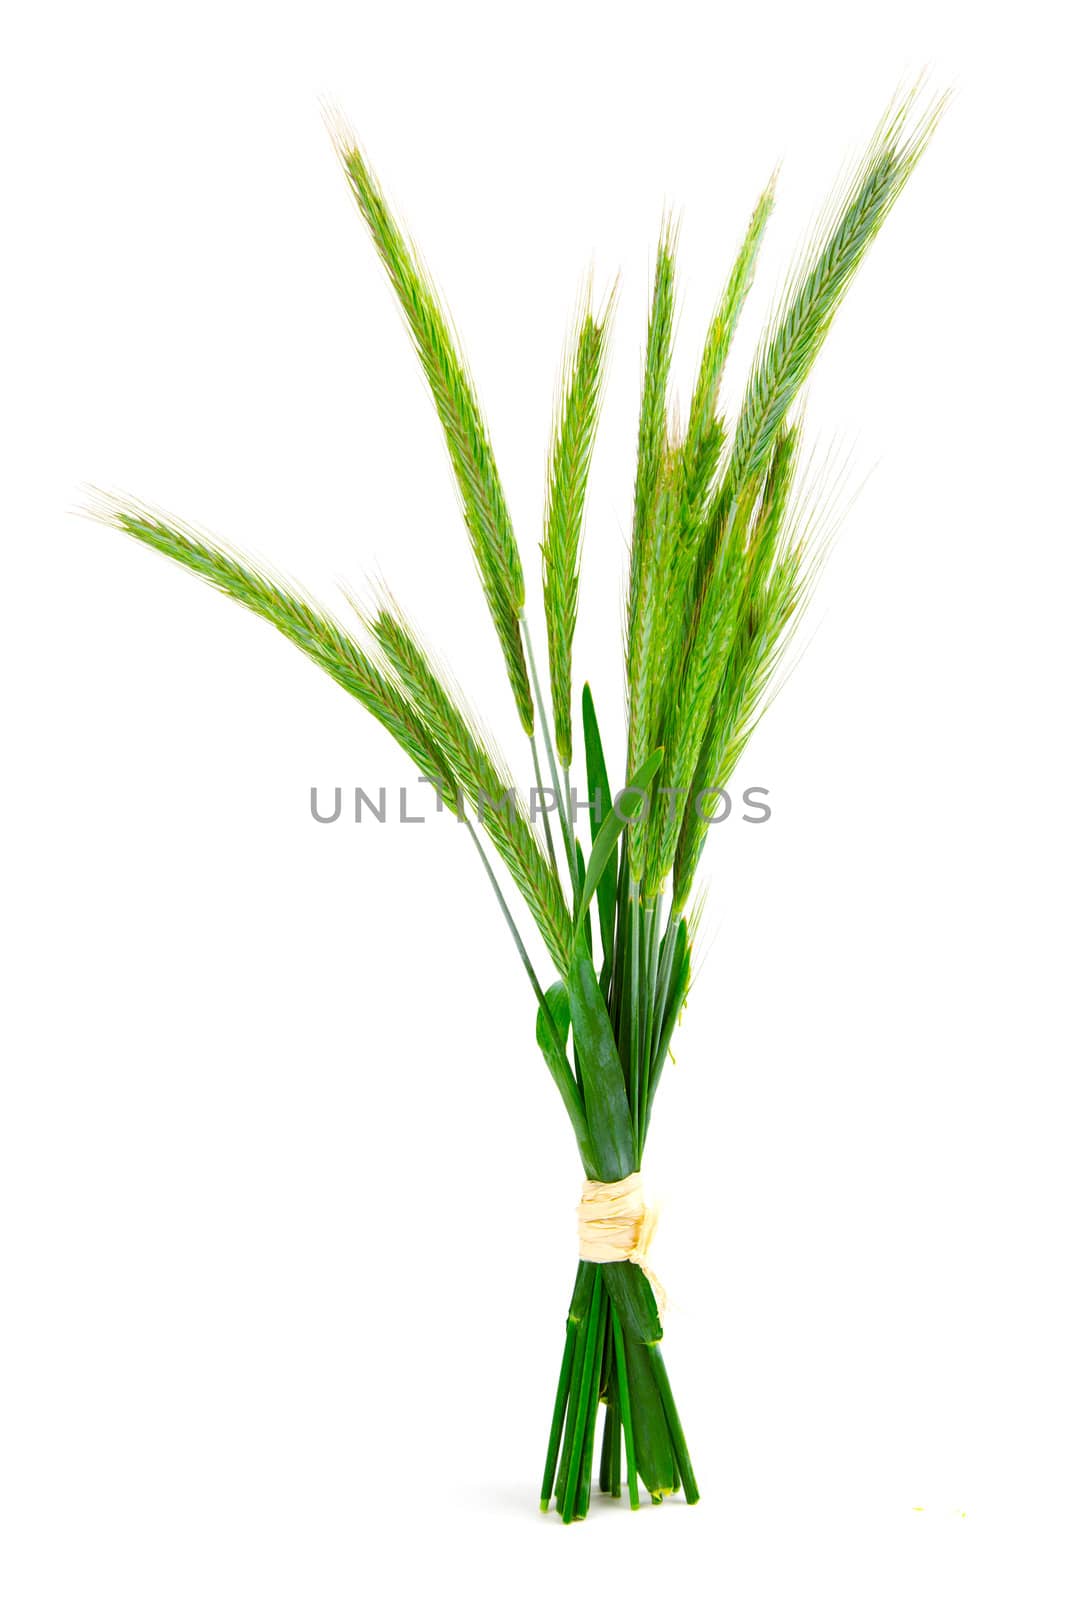 Green rye spikes (Secale cereale), on white background. by motorolka